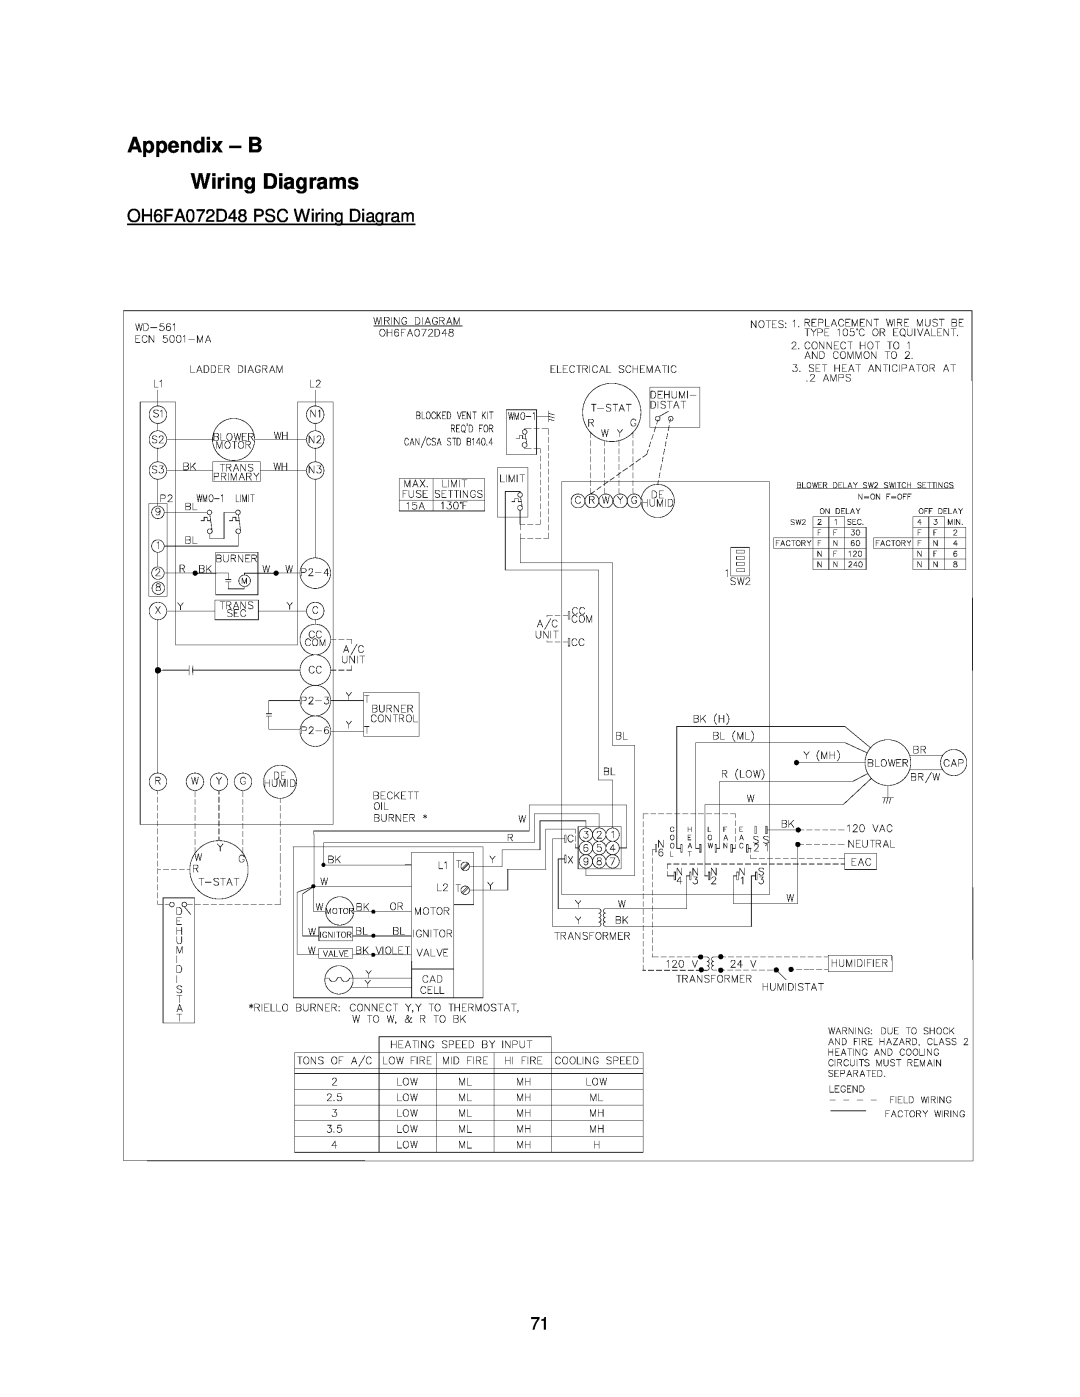 Thermo Products OHFA199DV5B, OHFA199DV5R operation manual Appendix - B Wiring Diagrams, OH6FA072D48 PSC Wiring Diagram 